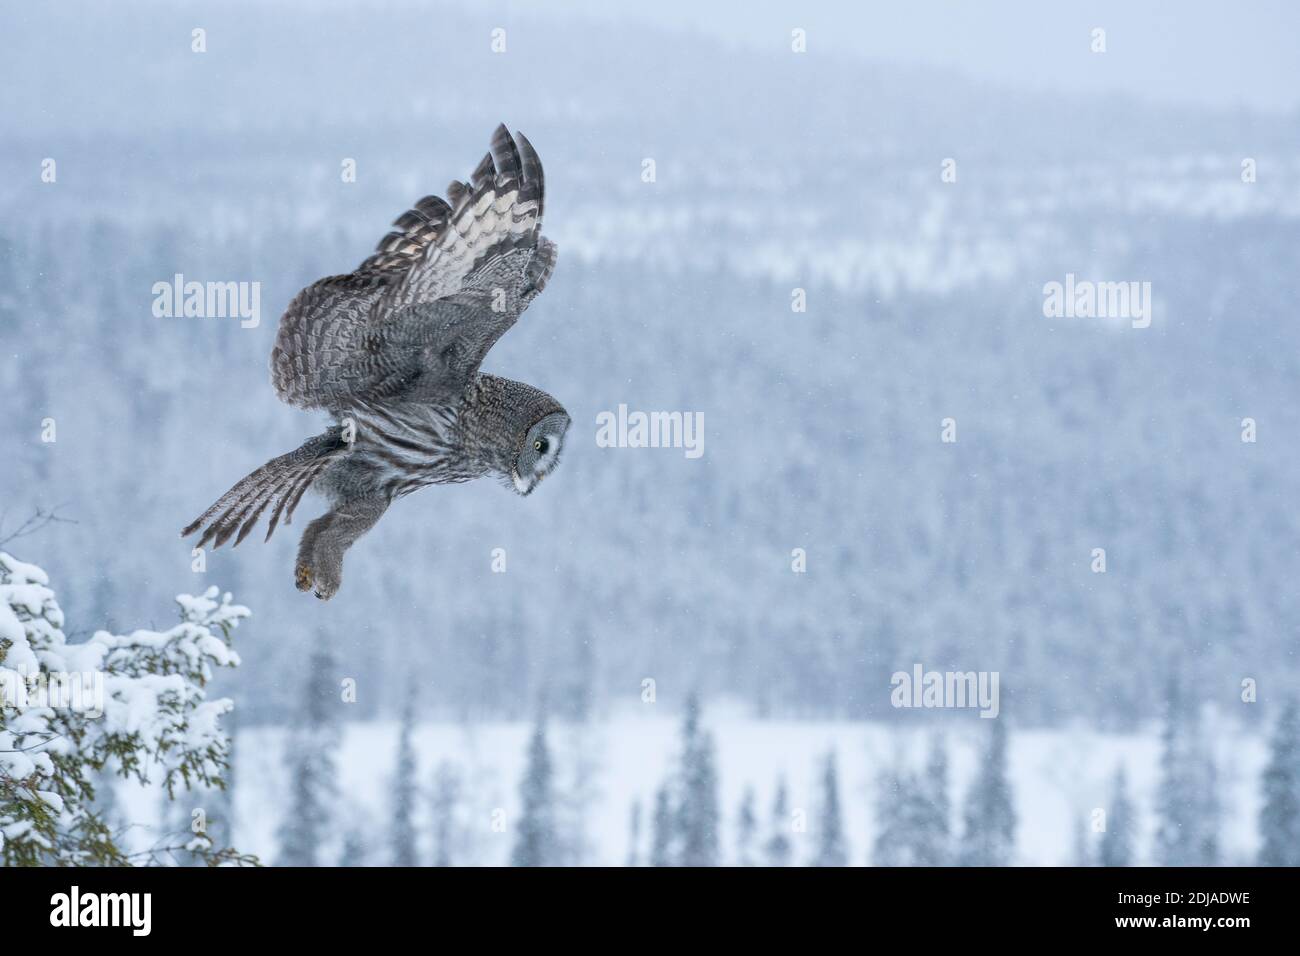 Powerful Great Grey Owl (Strix nebulosa) taking off from a small tree in a snowy taiga forest near Kuusamo, Northern Finland. Stock Photo